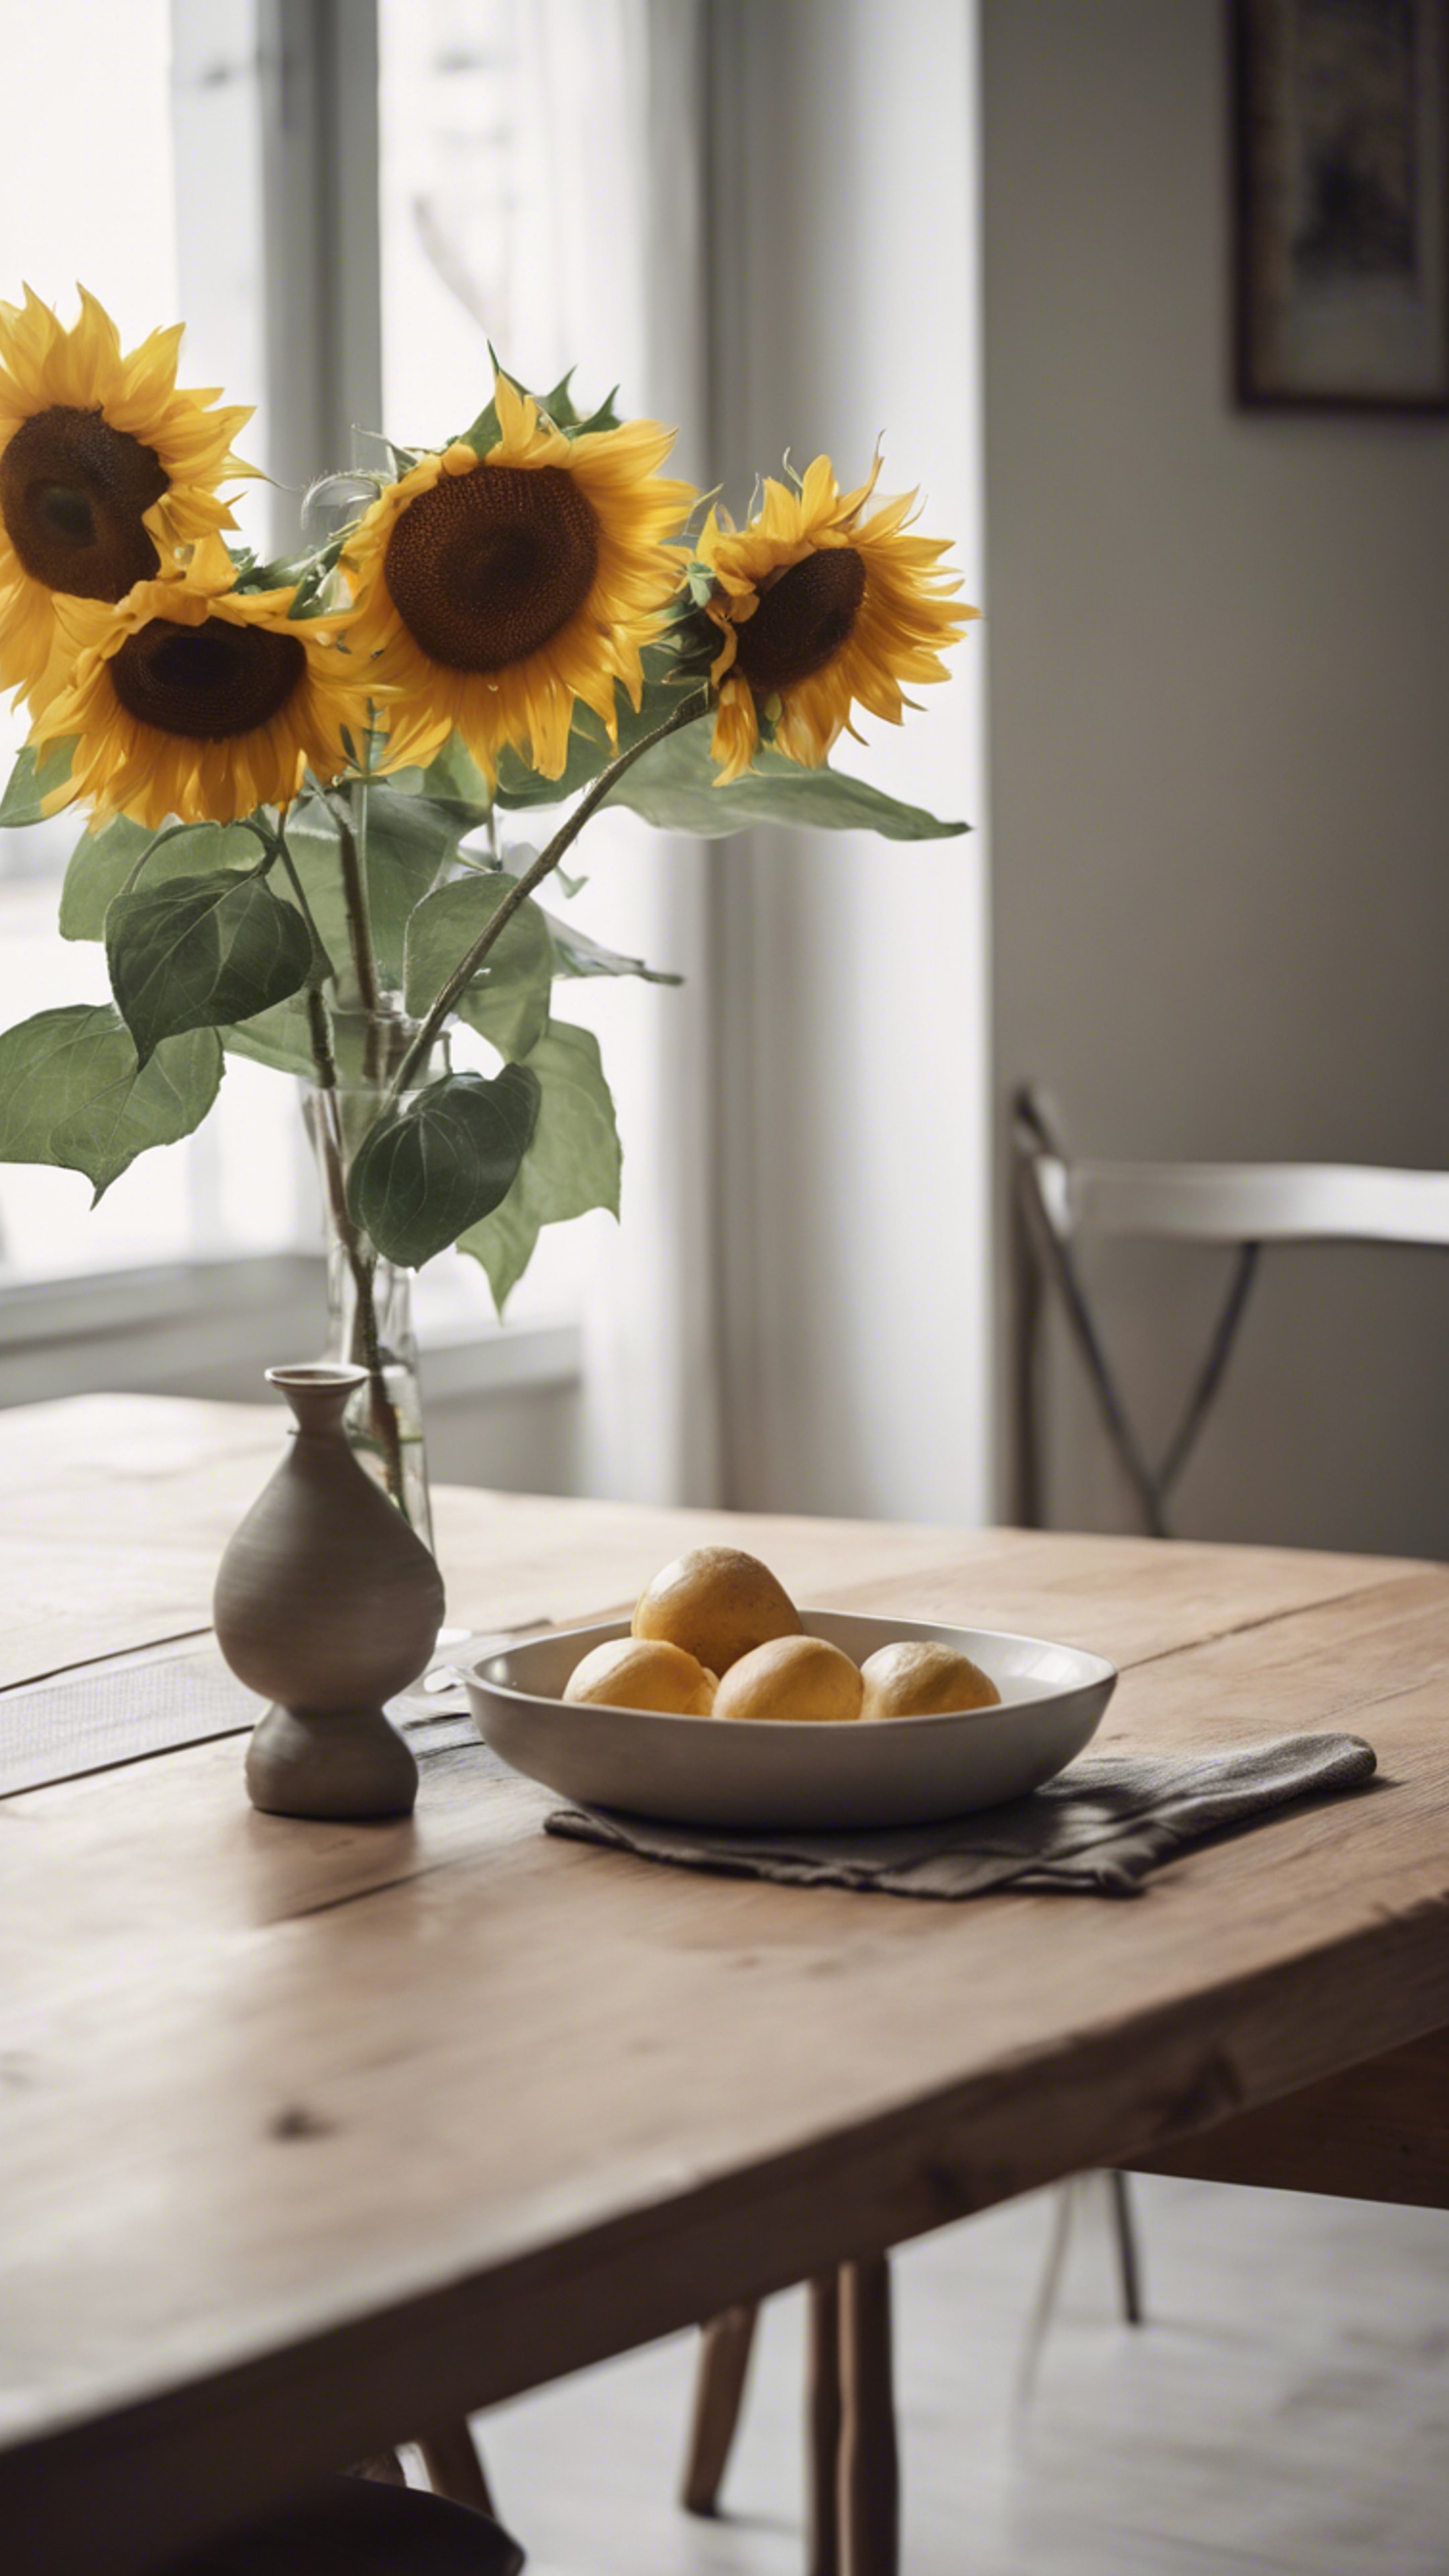 A minimalist dining area with a wooden table, set with simple china and a vase of sunflowers. Tapeta na zeď[7db5290c1b5a4d25ba08]